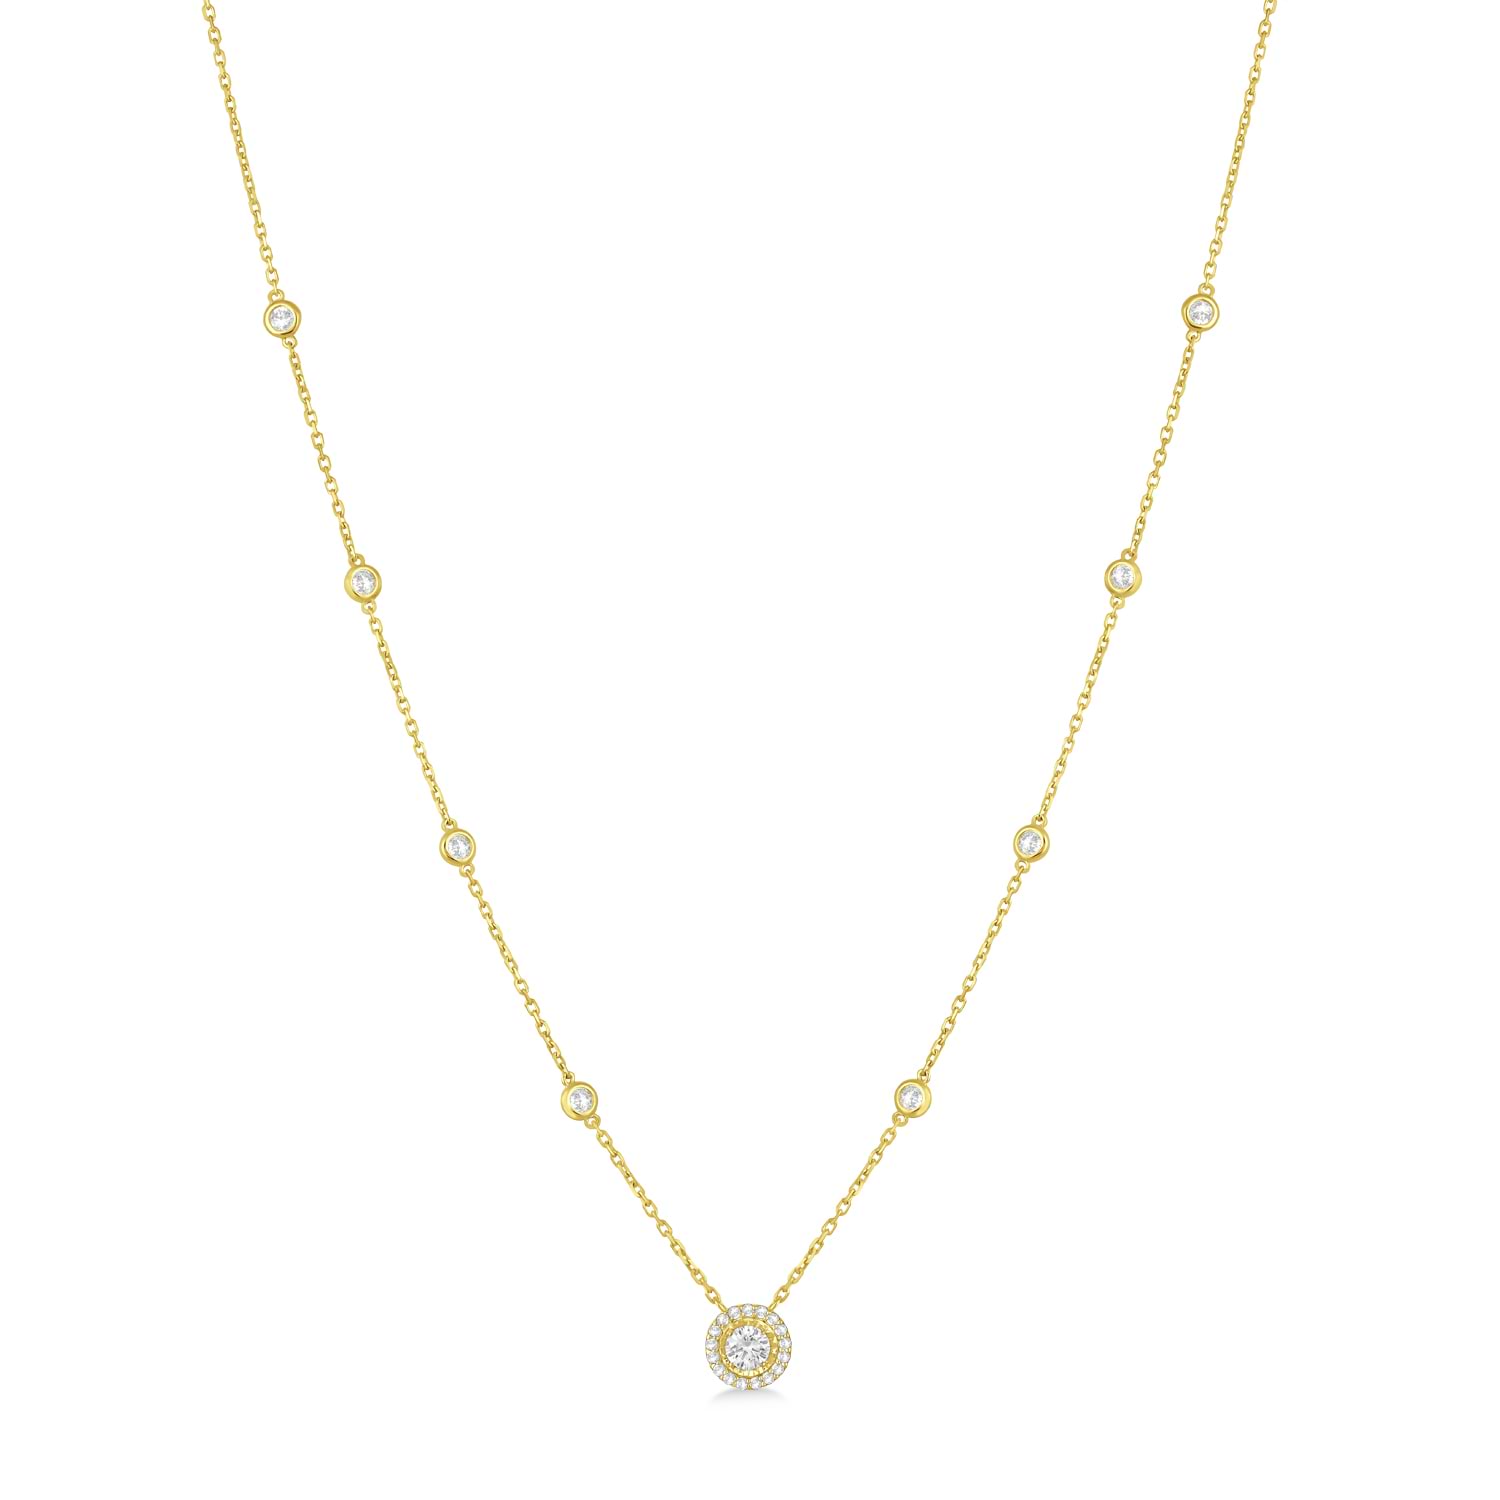 Diamond Halo Pendant Station Necklace in 14k Yellow Gold (0.50 ctw)